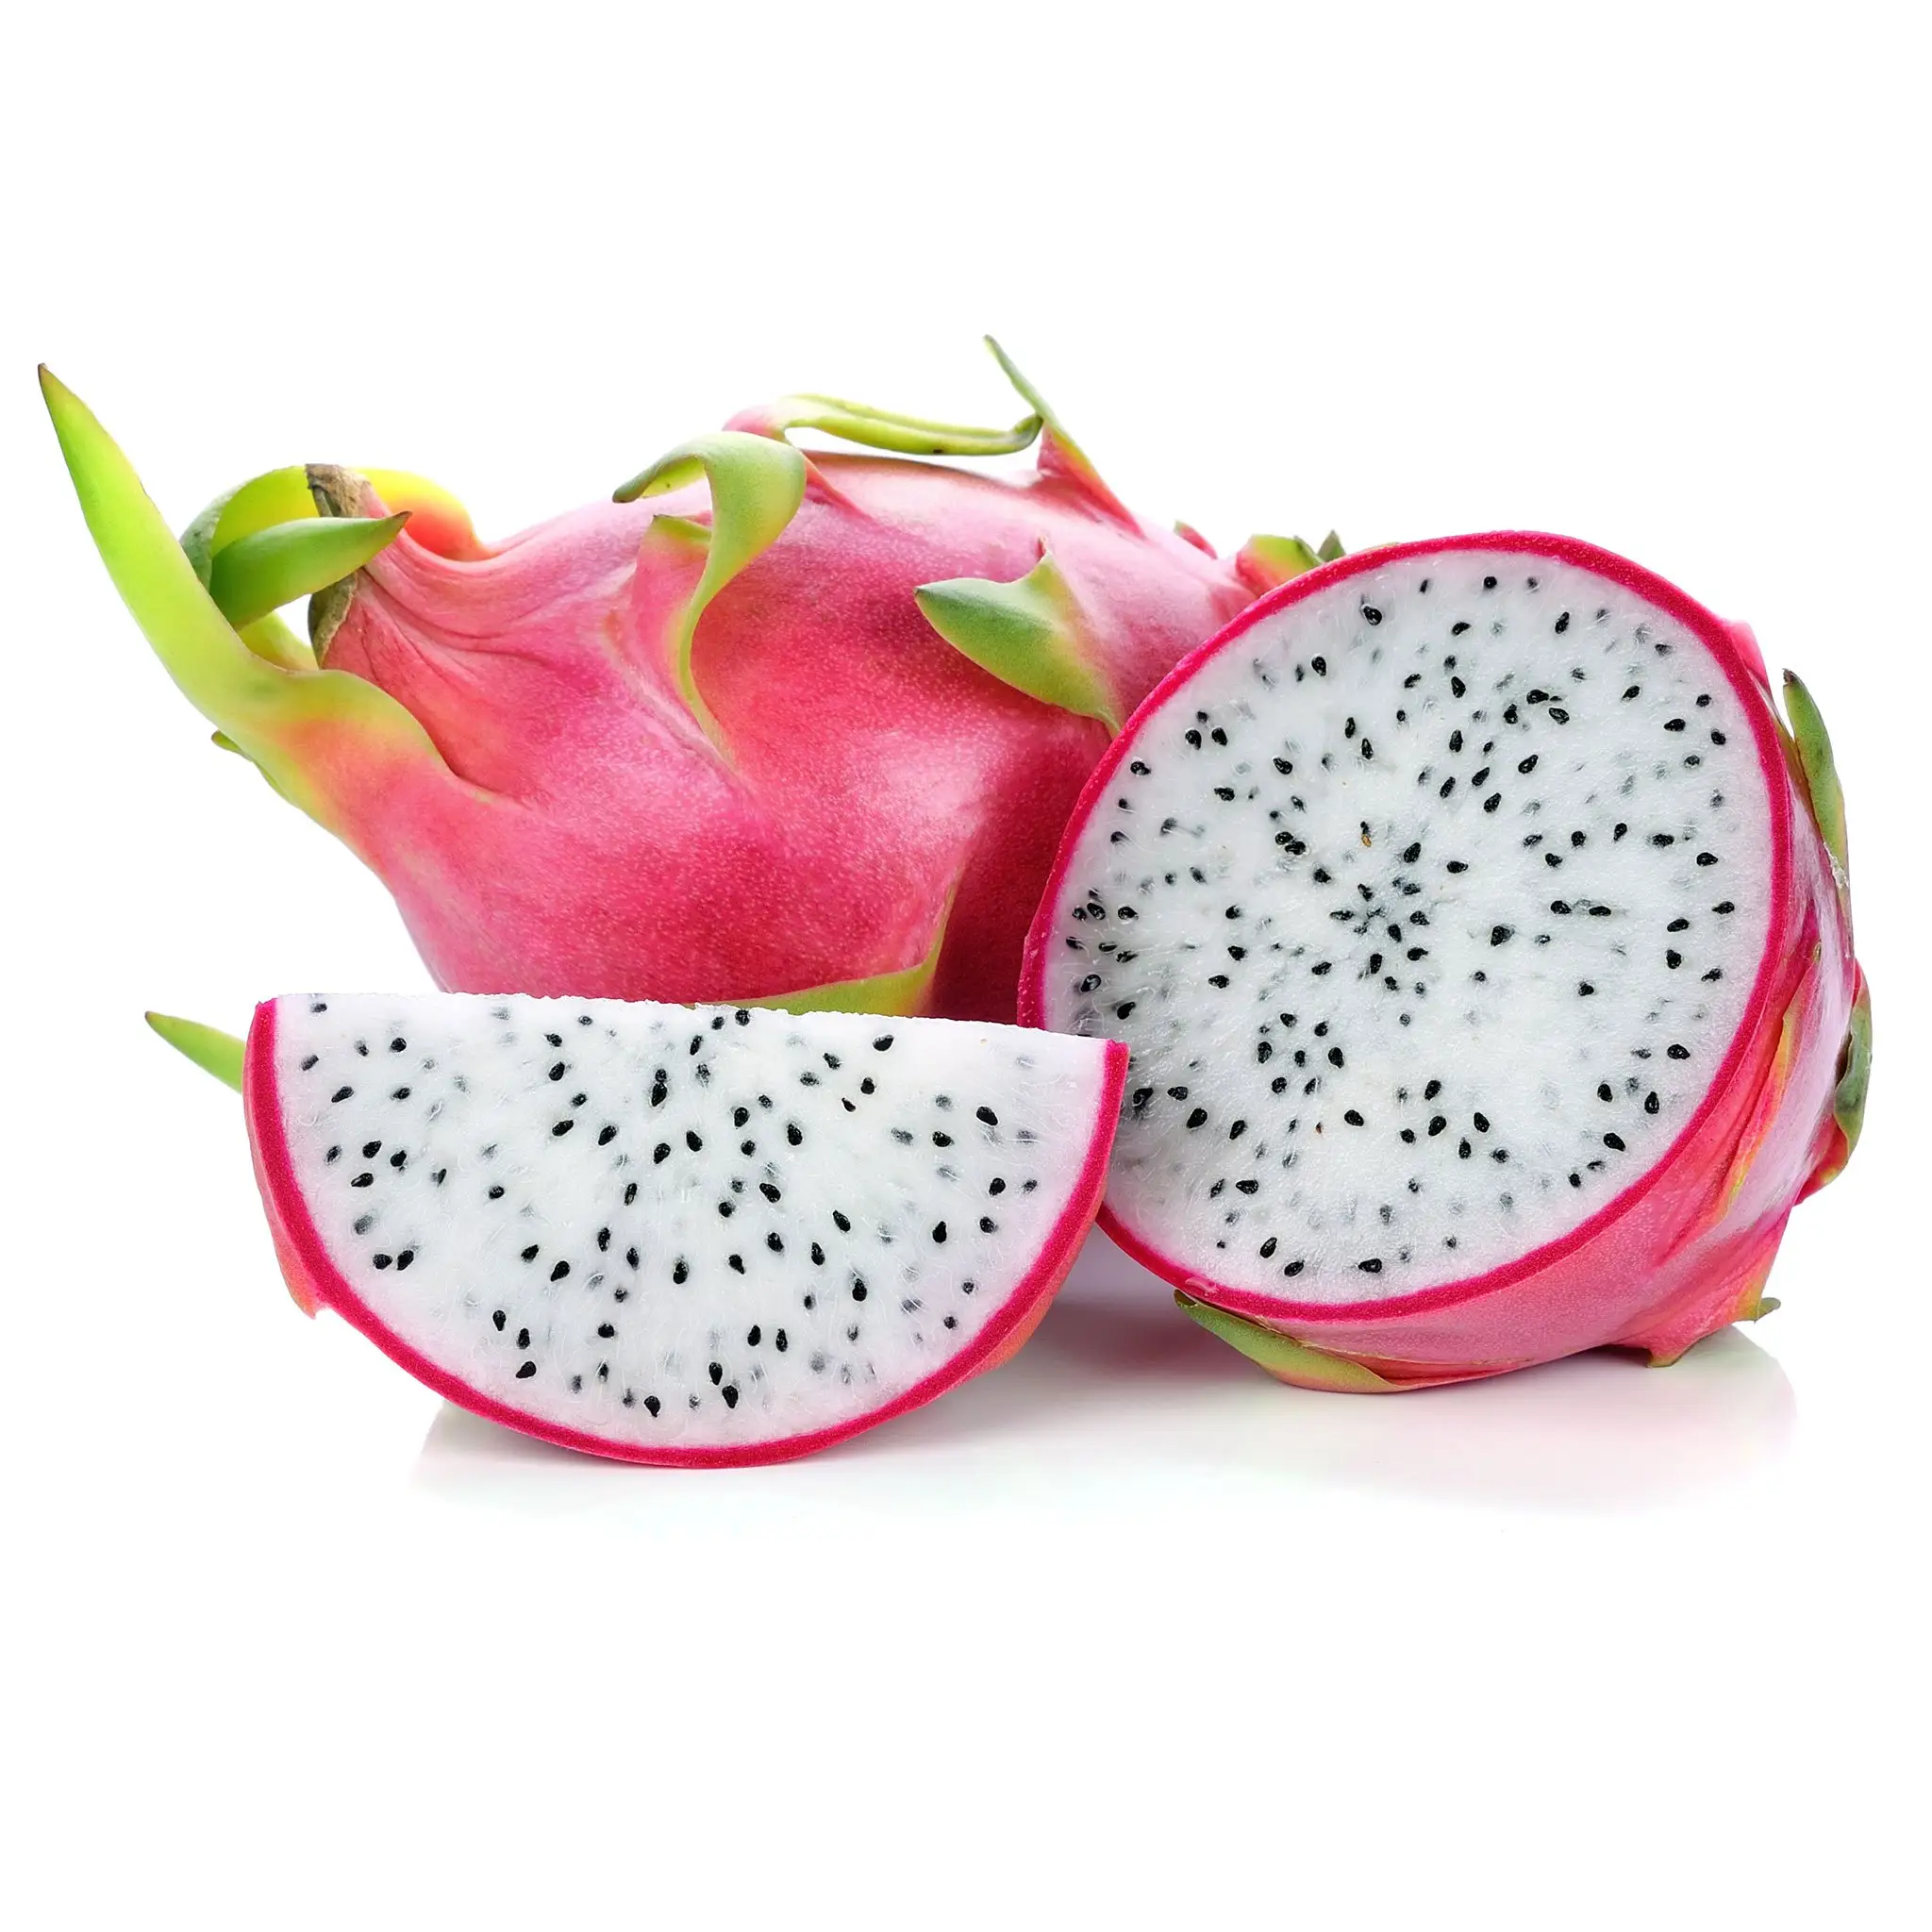 100% High Quality 80%-90% Maturity Red Dragon Fruit Made In Vietnam Tropical Food